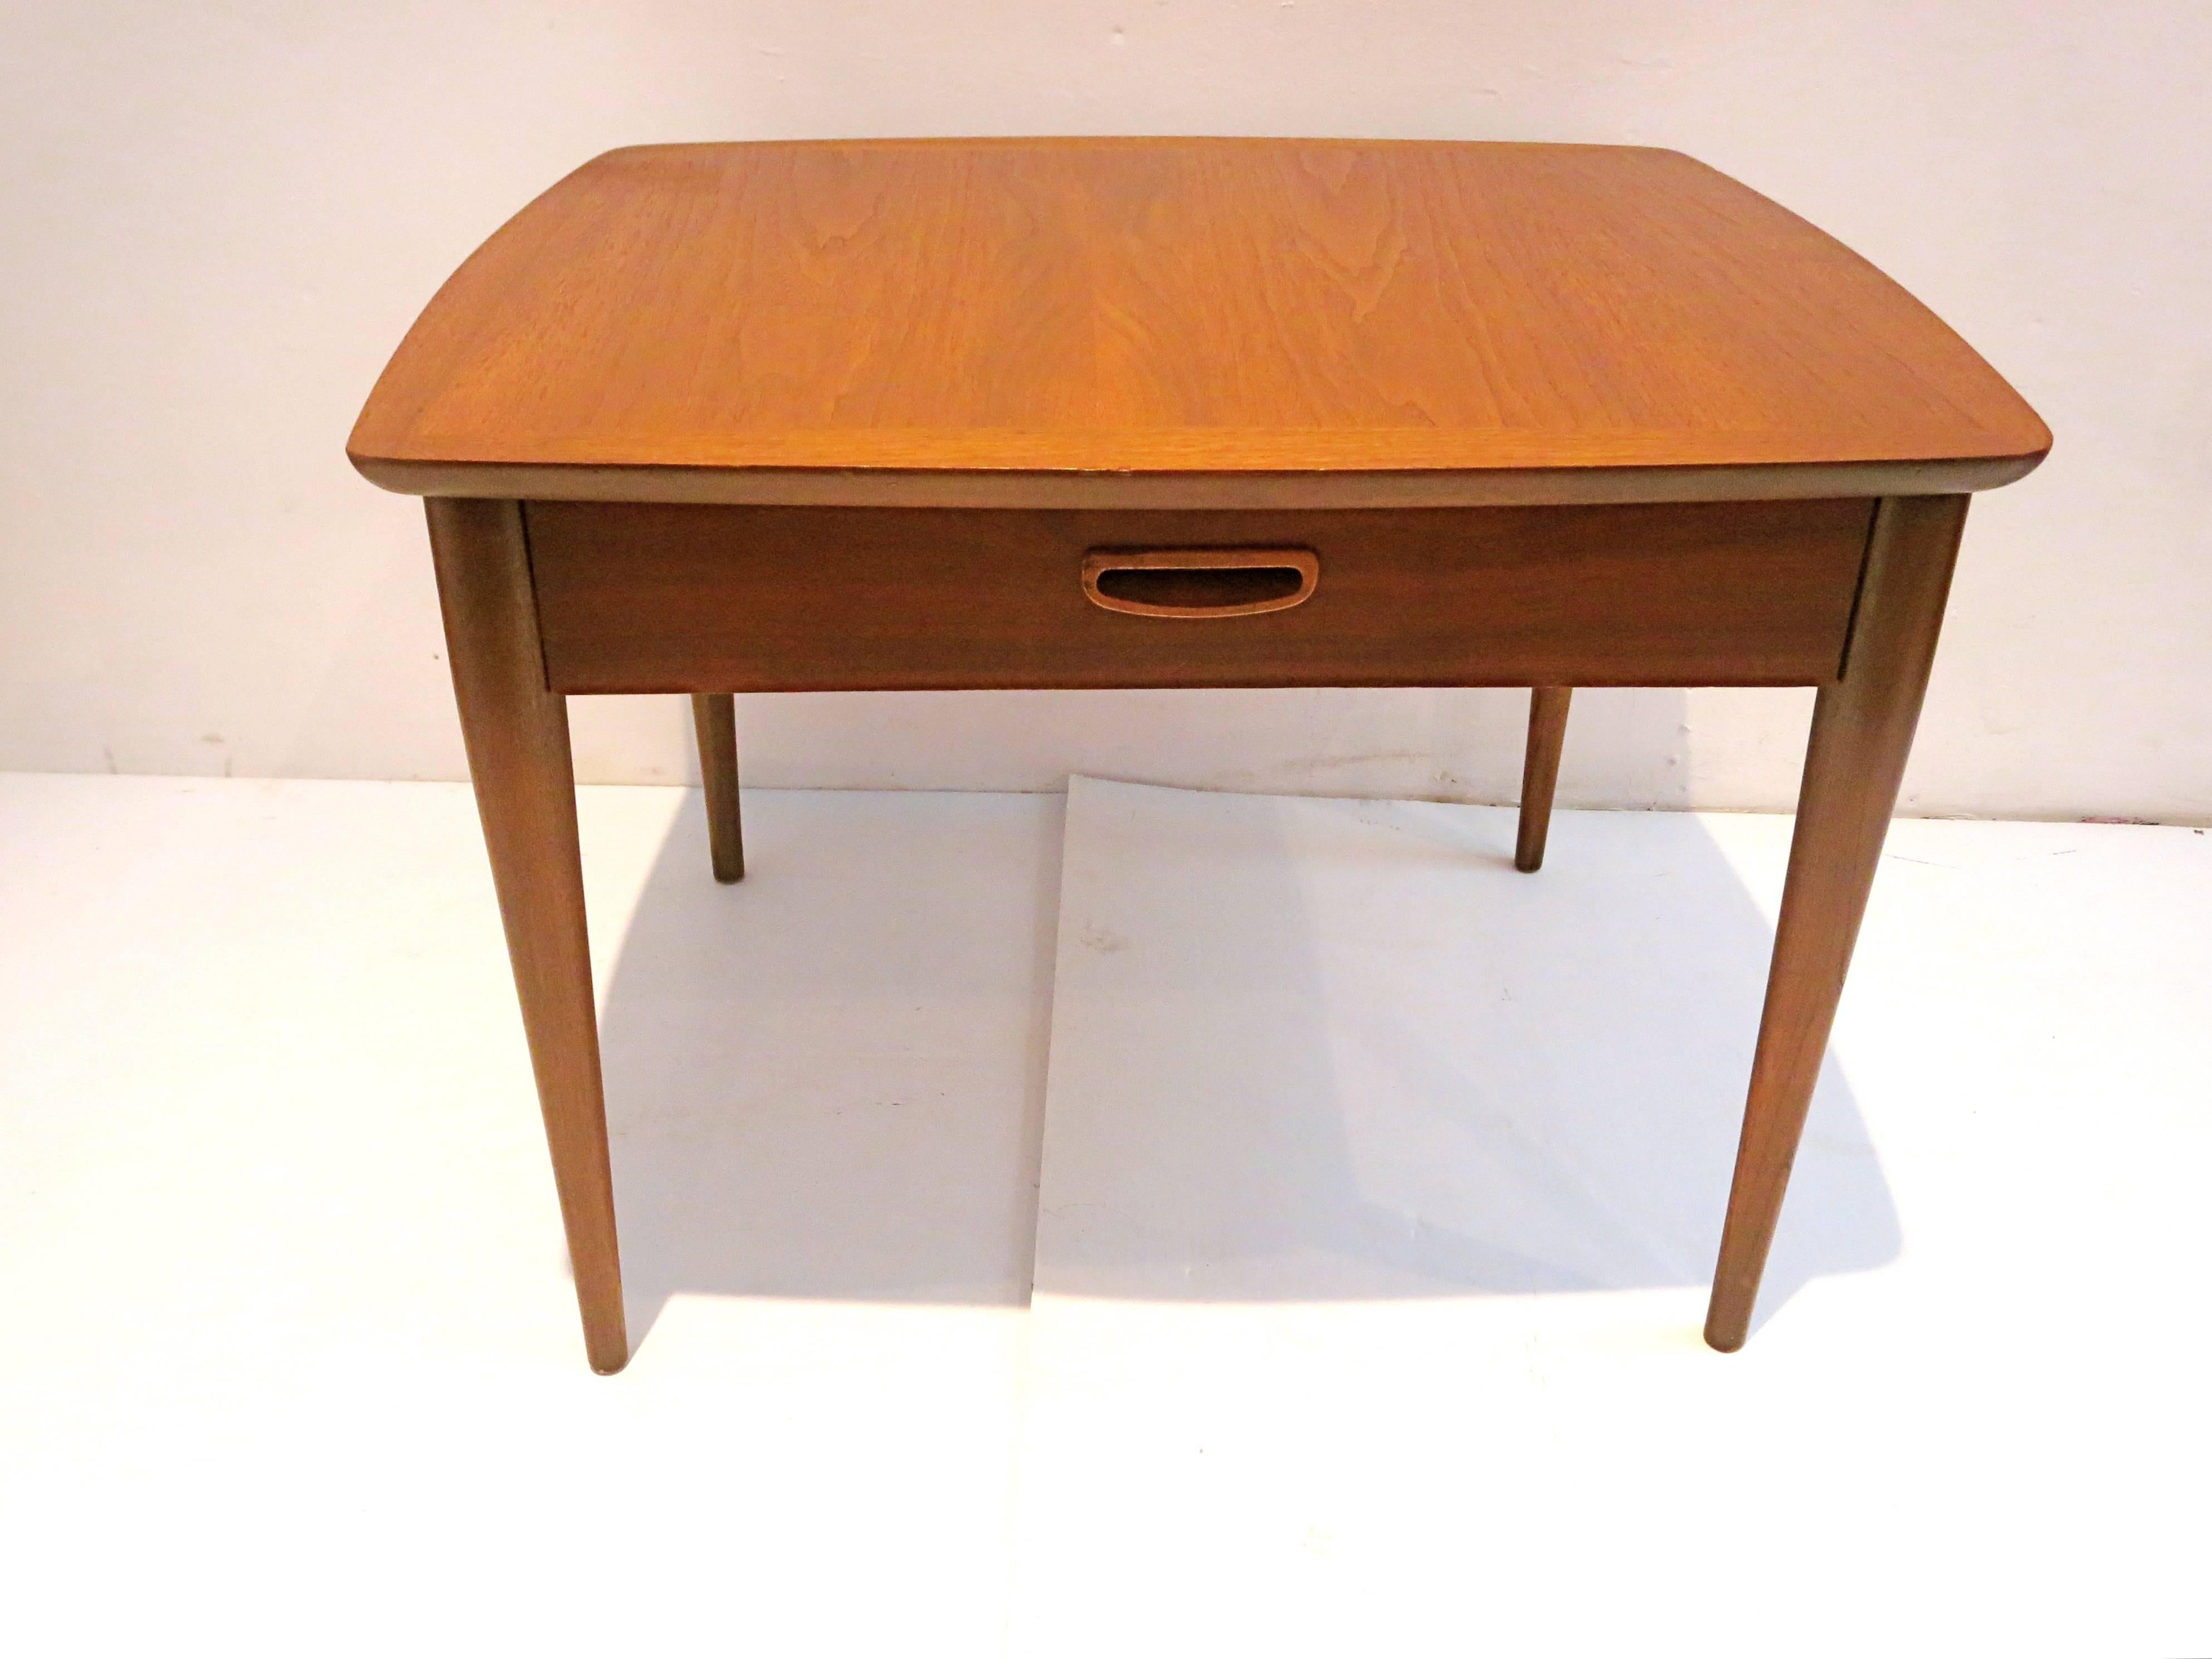 20th Century 1950s Danish Modern End Table in Walnut with Drawer